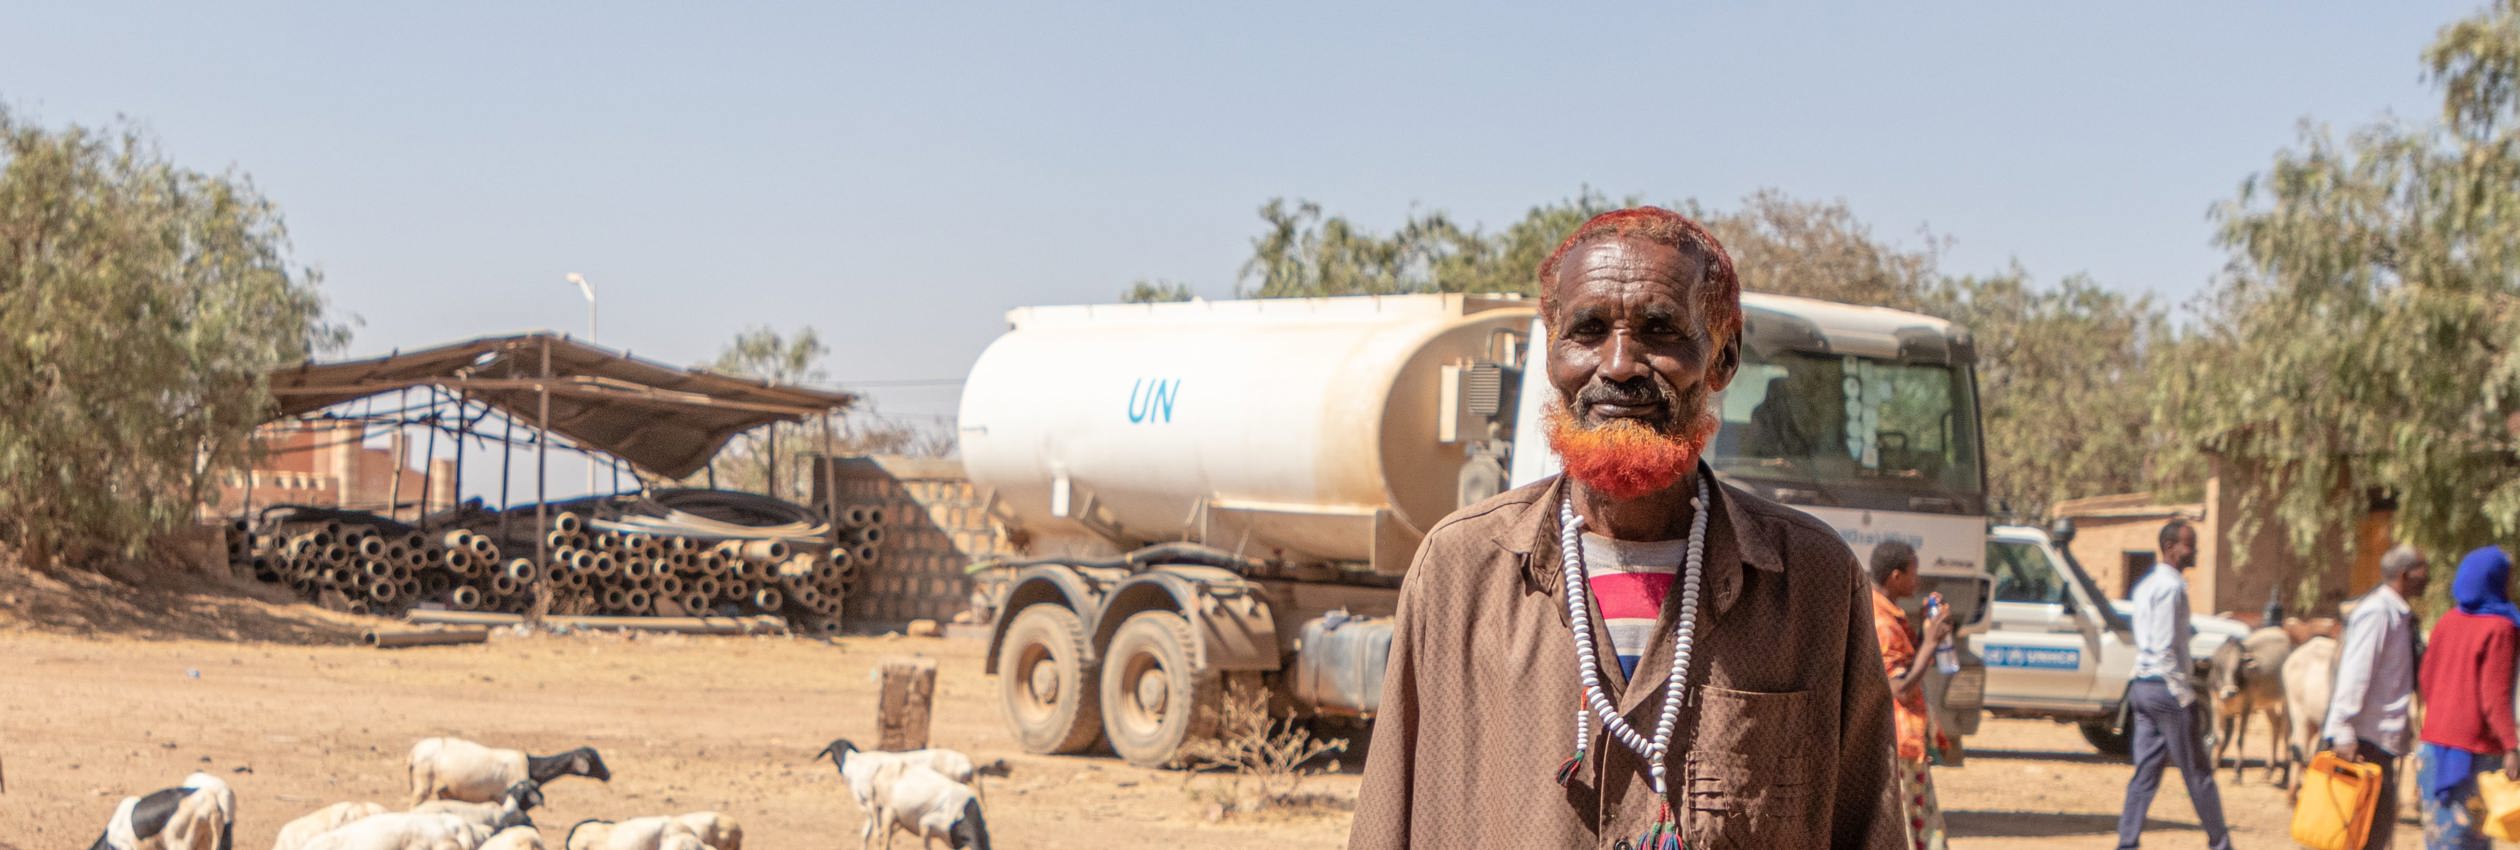 Thousands of families have been displaced due to recent climate change and droughts in Ethiopia's Somali regions.